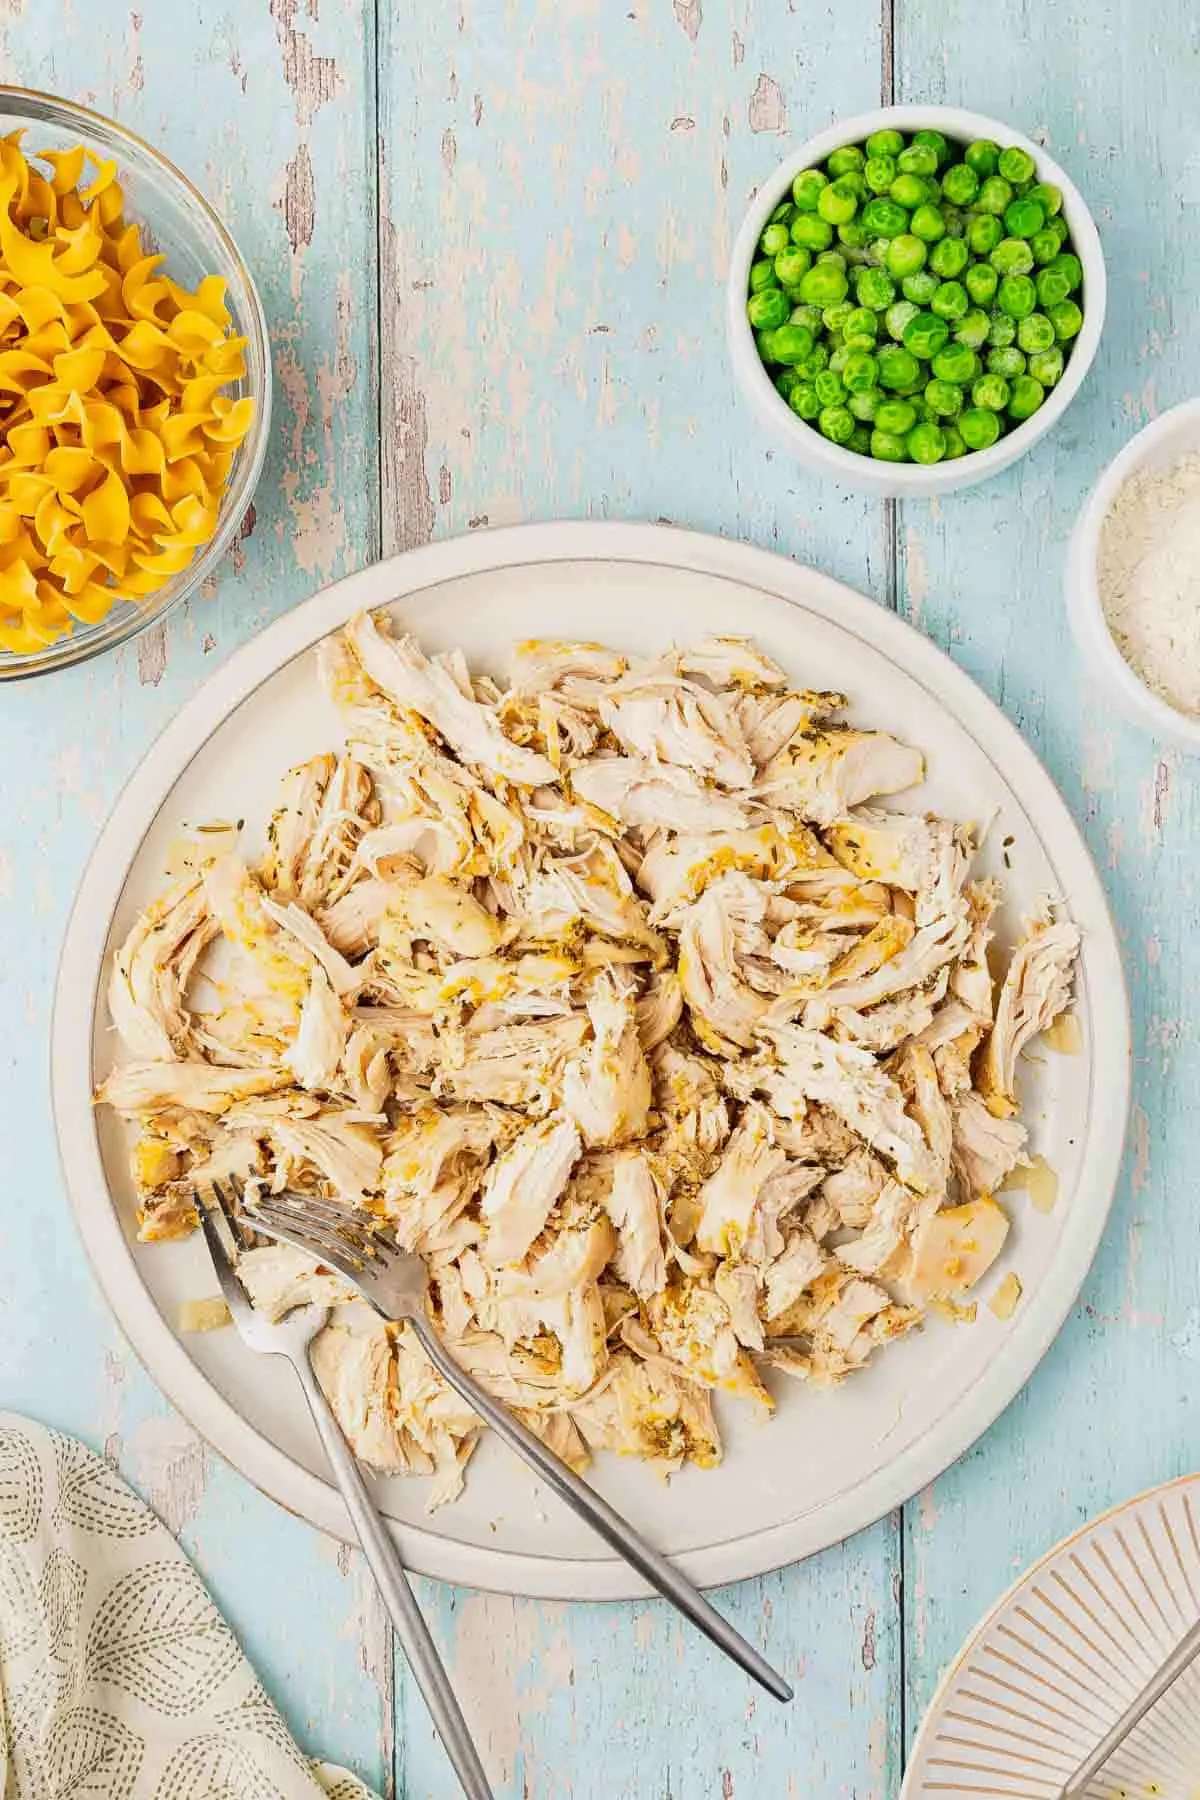 shredded chicken breast on a plate